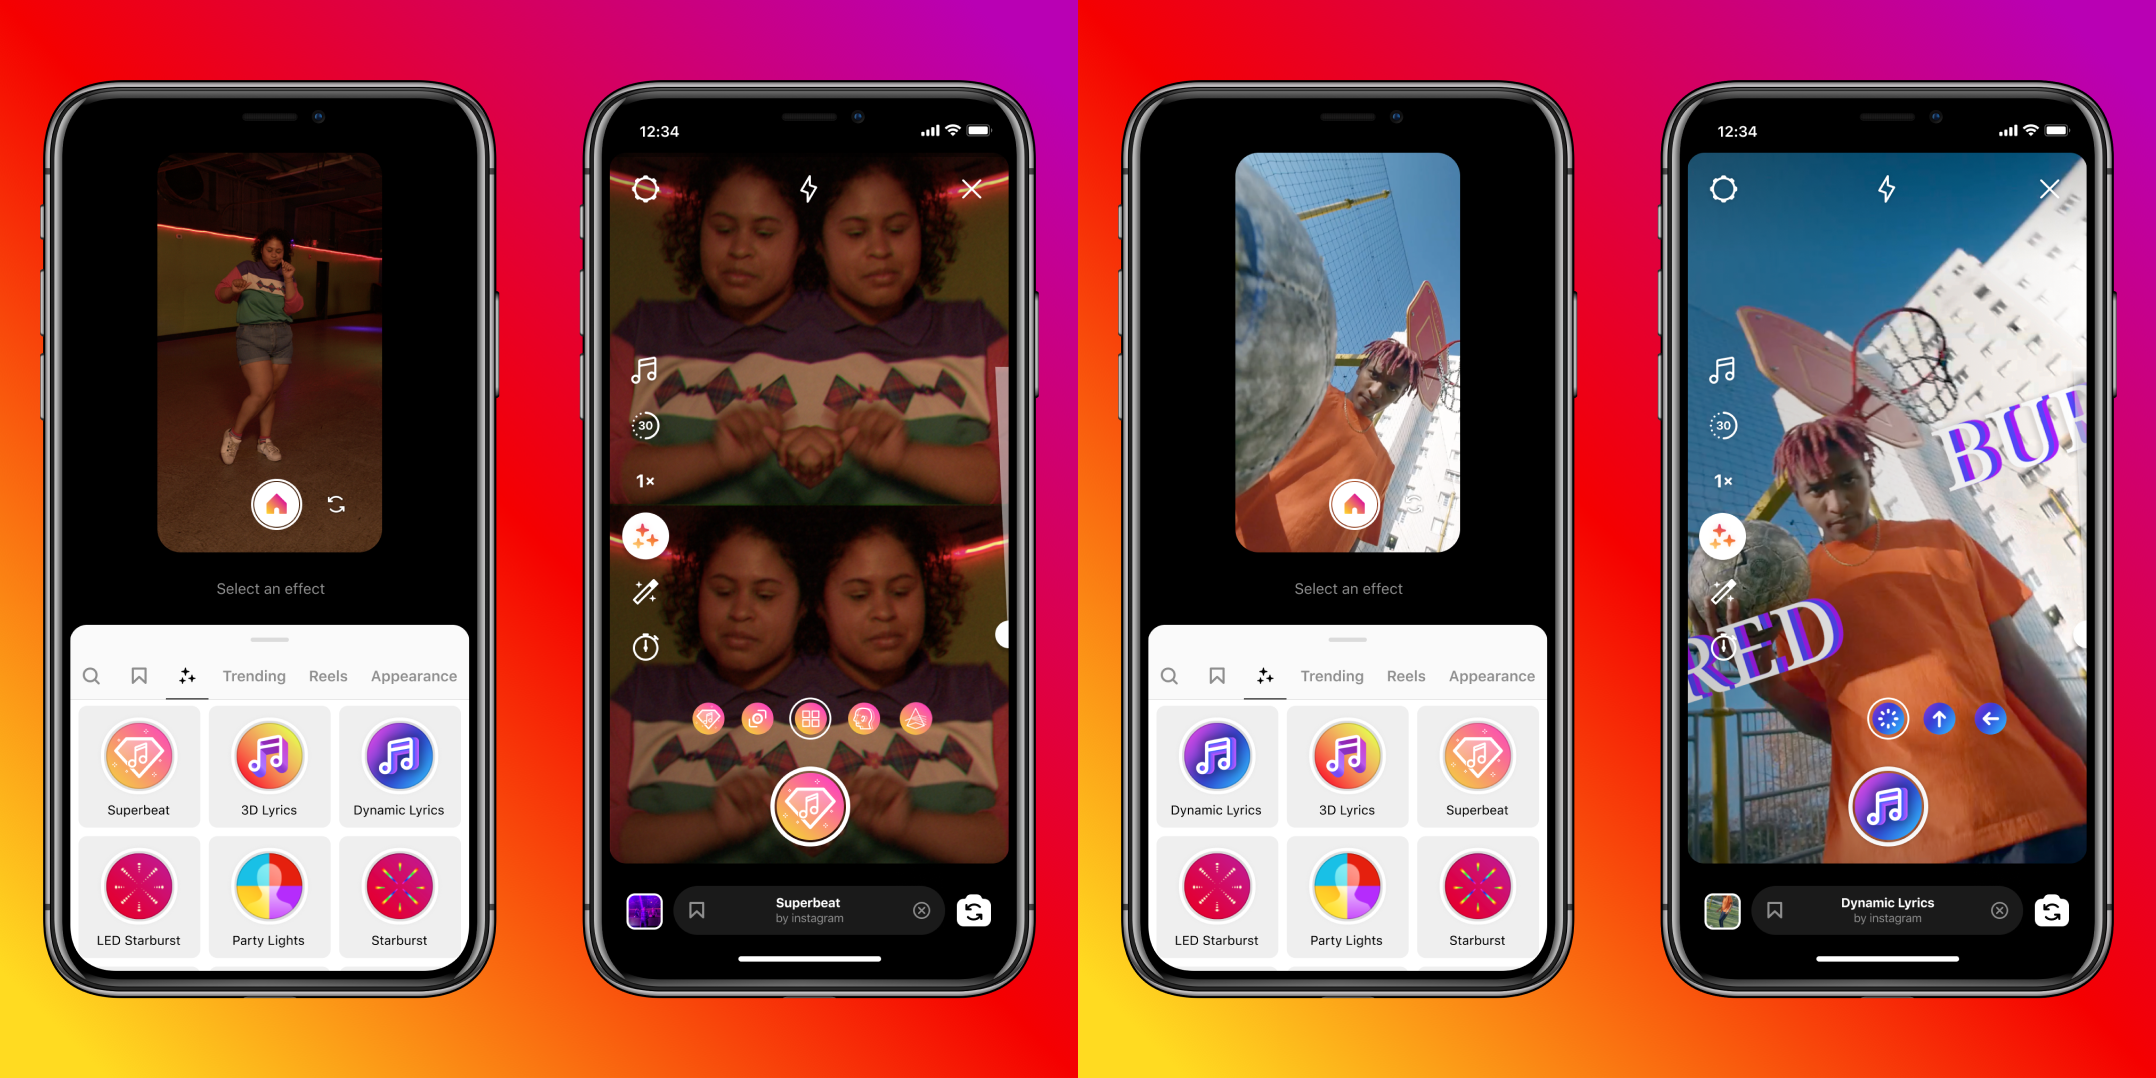 Instagram Superbeat, 3D Lyrics and Dynamic Lyrics makes it easier than ever to create engaging Reels